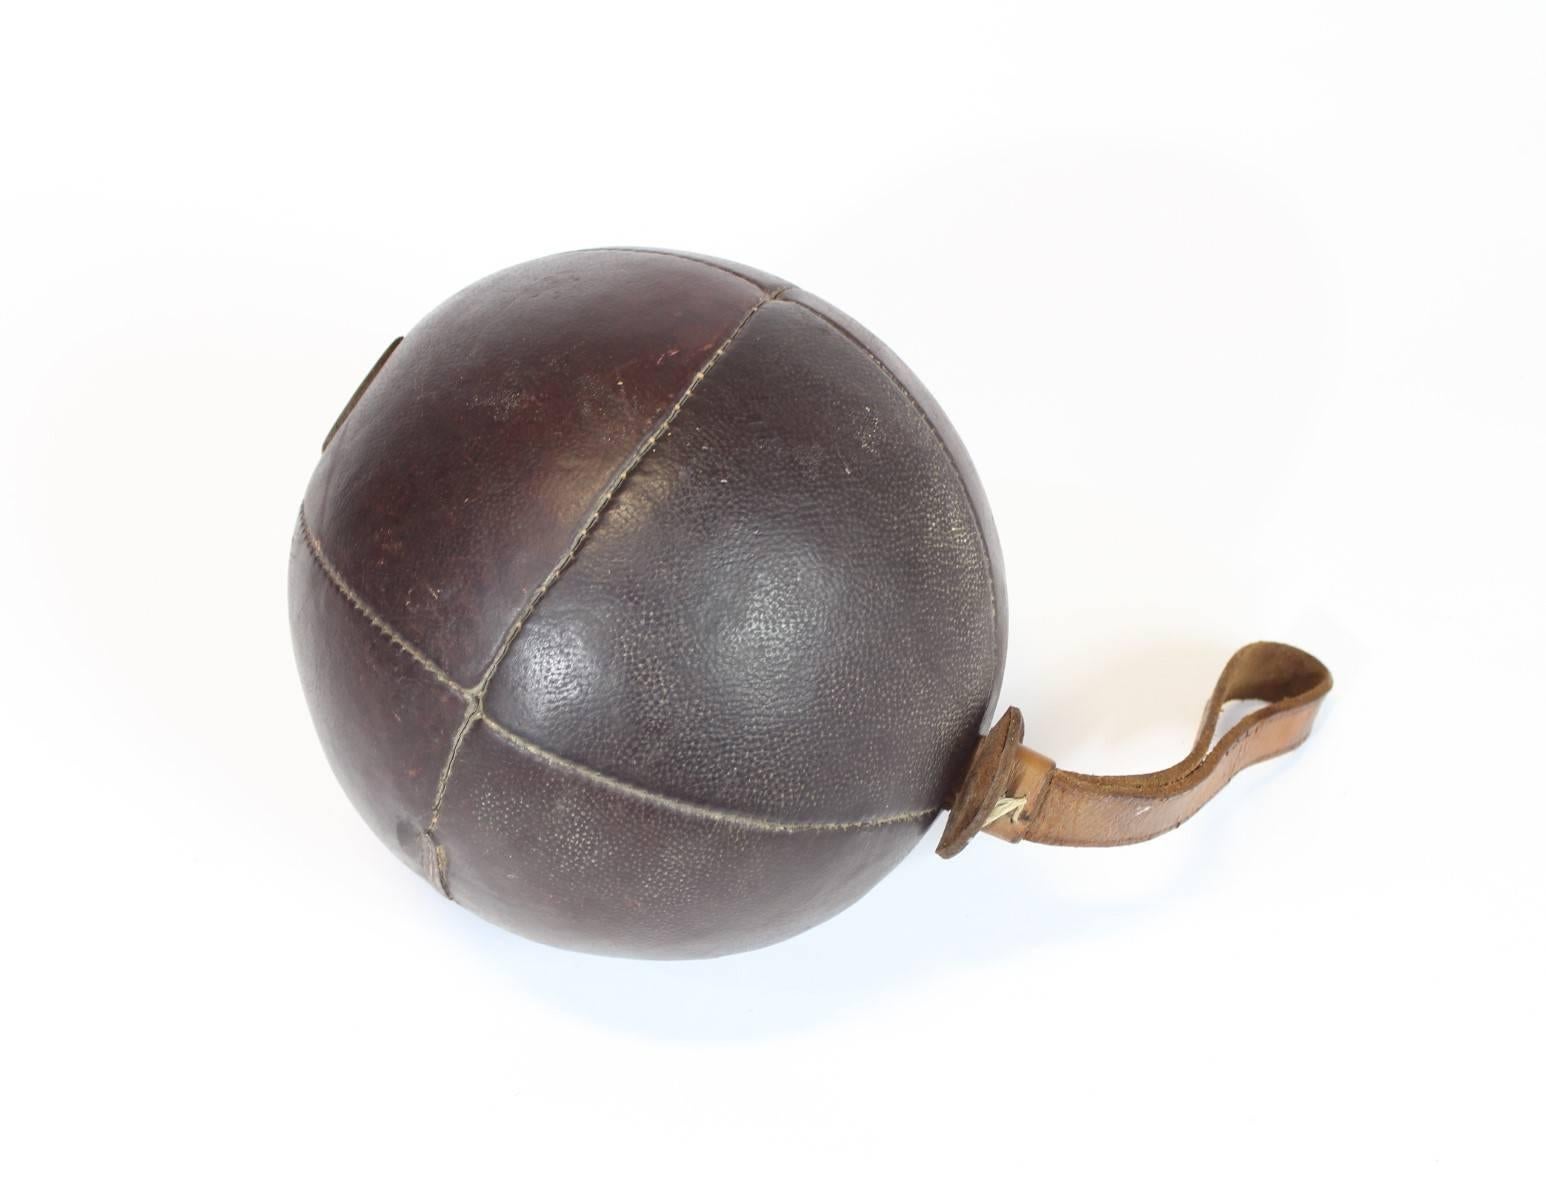 Vintage leather medicine ball with strap from the 1920s.